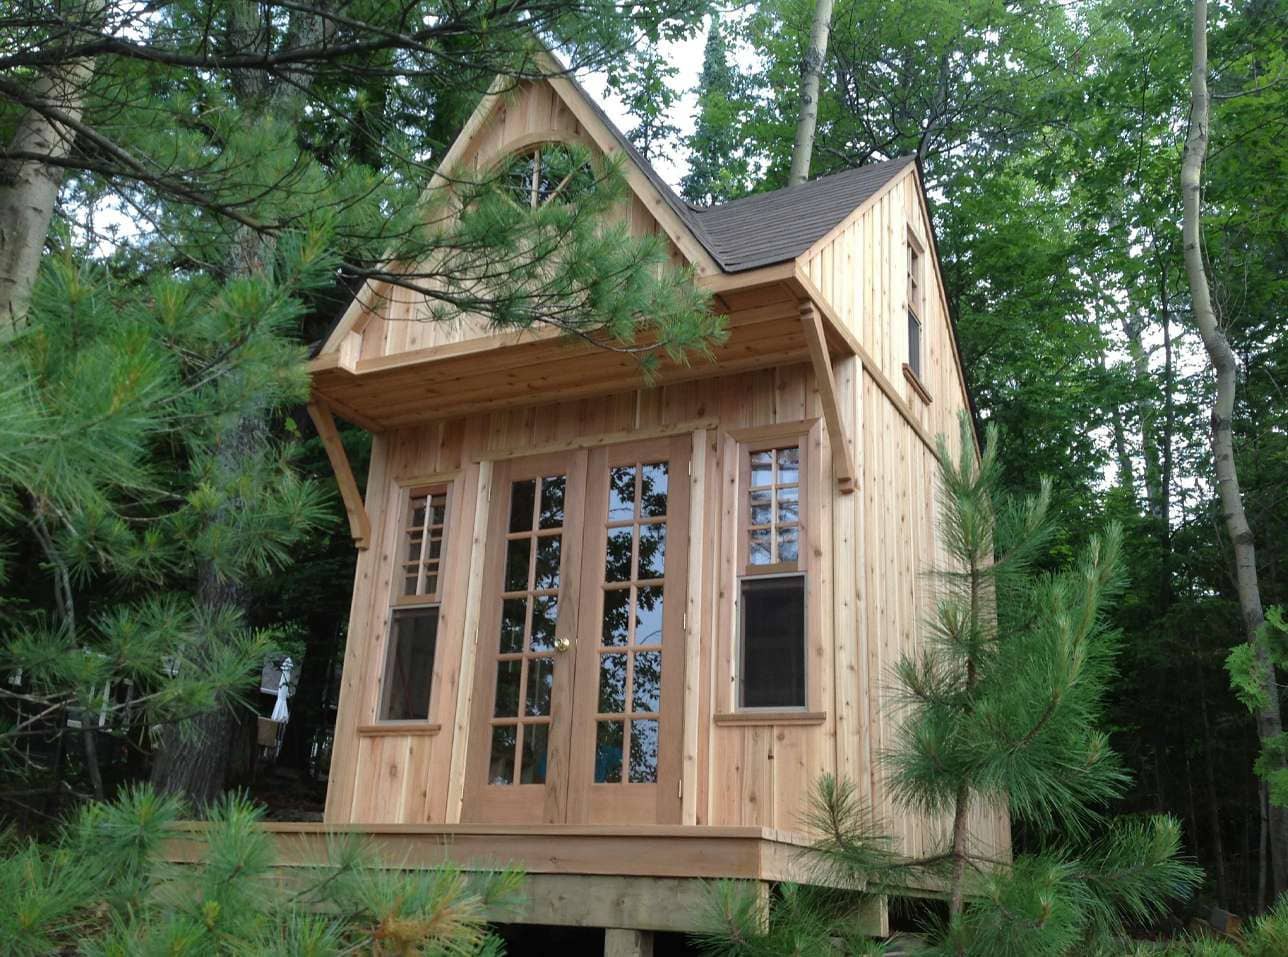 Prefab Bala bunkie kit 10 x 10 with pine loft in Temagami Ontario. ID Number 199643-2